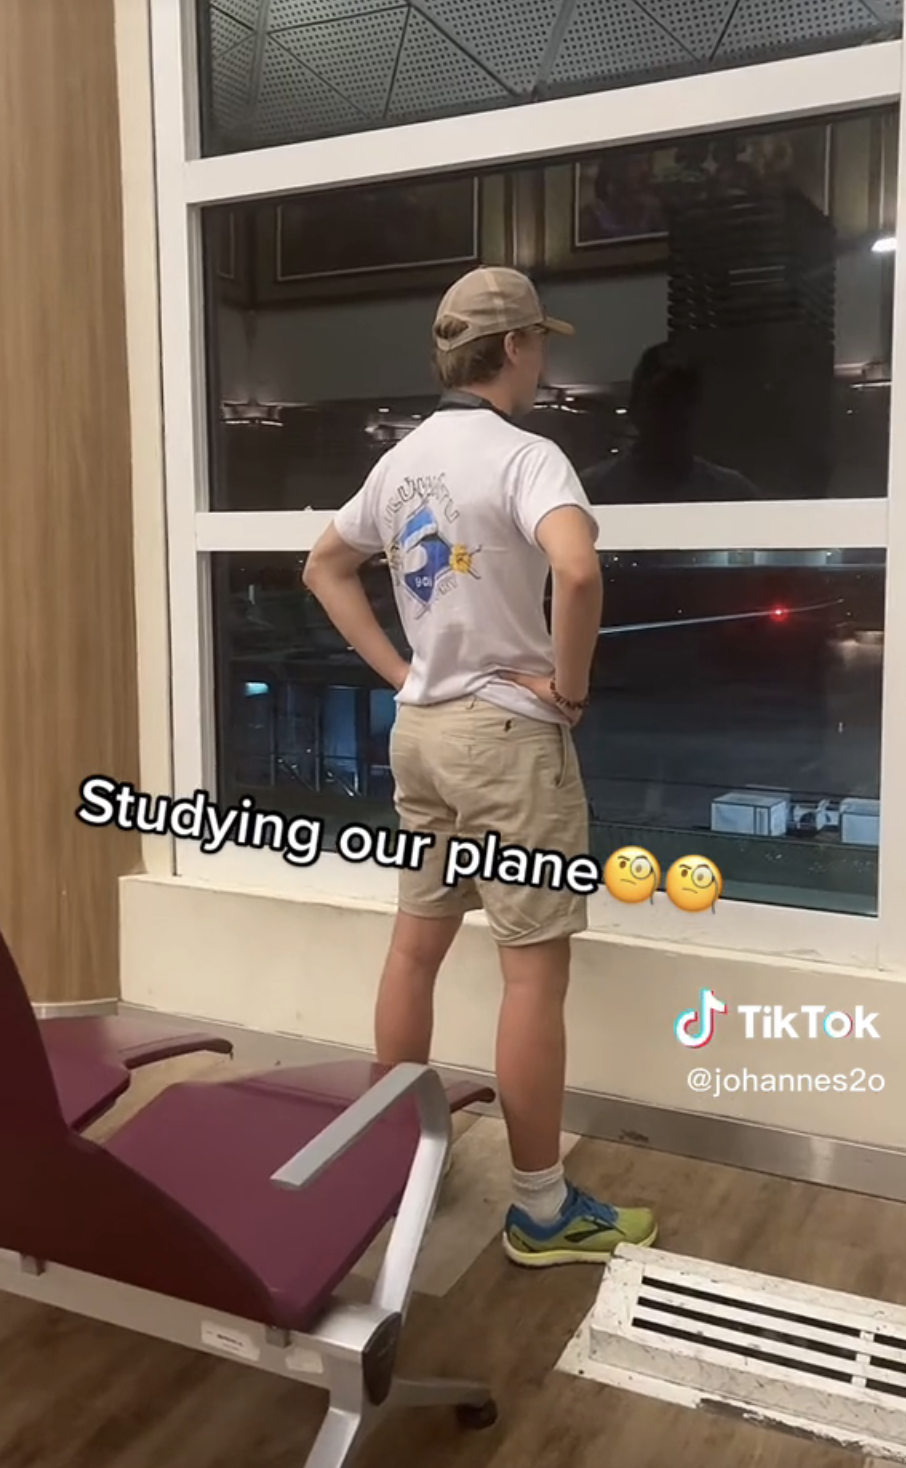 Airport Dad standing at the airport windows with his hands on his hips, with caption "Studying our plane" with monocle emoji